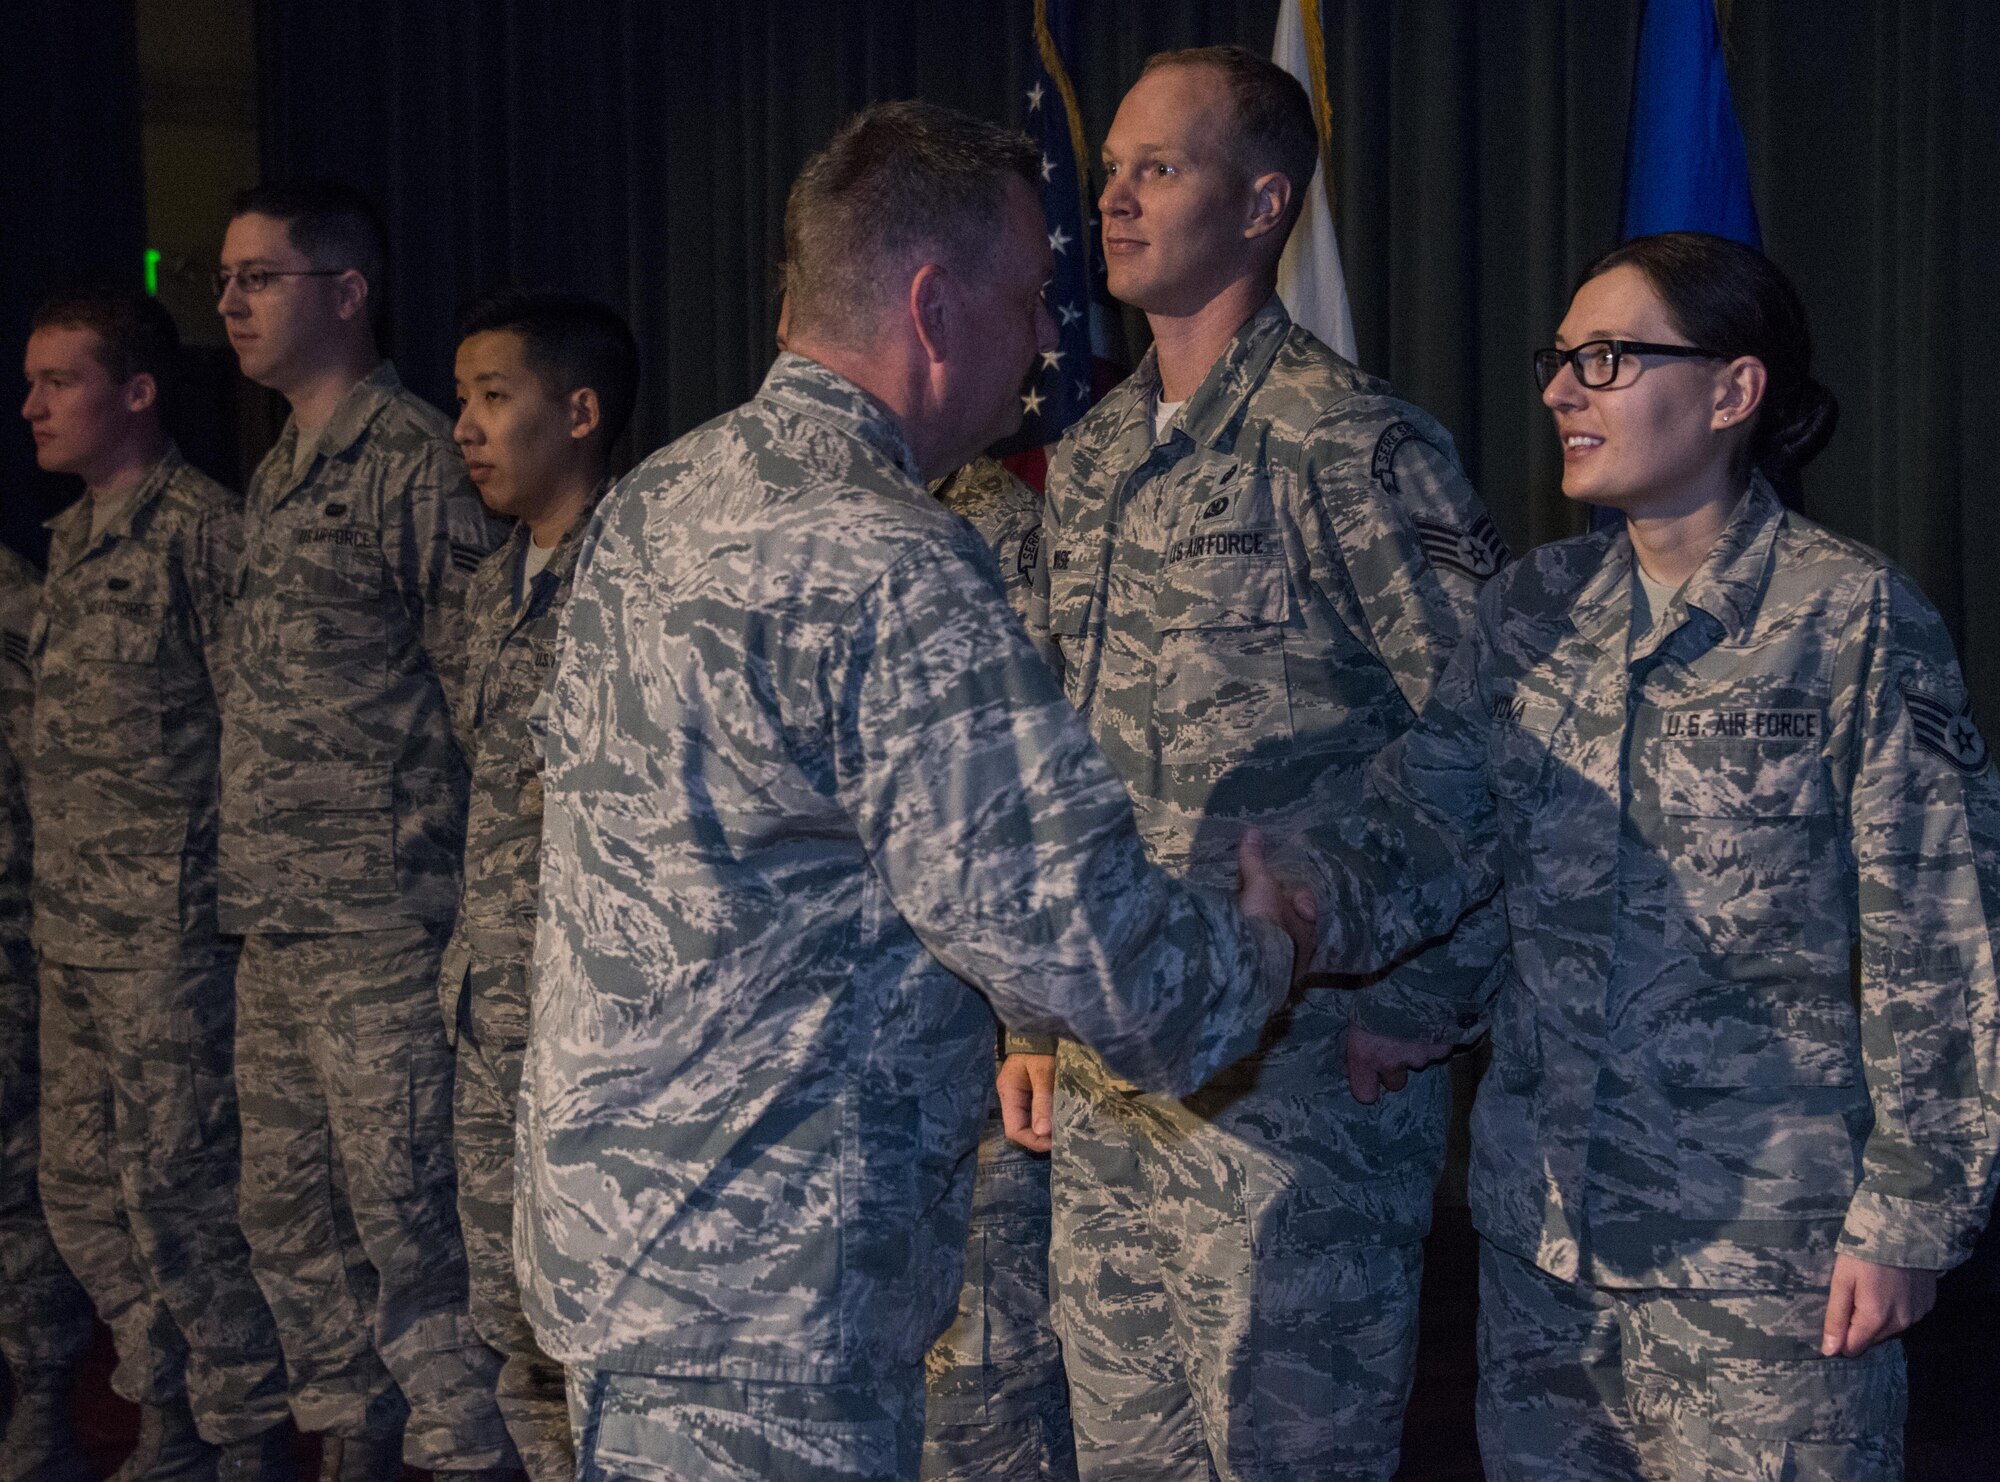 U.S. Air Force Lt. Gen. Brad Webb, commander of Air Force Special Operations Command, recognizes the innovative men and women of the 353rd Special Operations Group at an Airman all-call, Nov. 7, 2016, at Kadena Air Base, Okinawa, Japan. Supporting the AFSOC priority of relevance, the general and command chief recognized the innovated Airmen who keep special operations on the relevant end of the military spectrum. (U.S. Air Force photo by Capt. Jessica Tait)